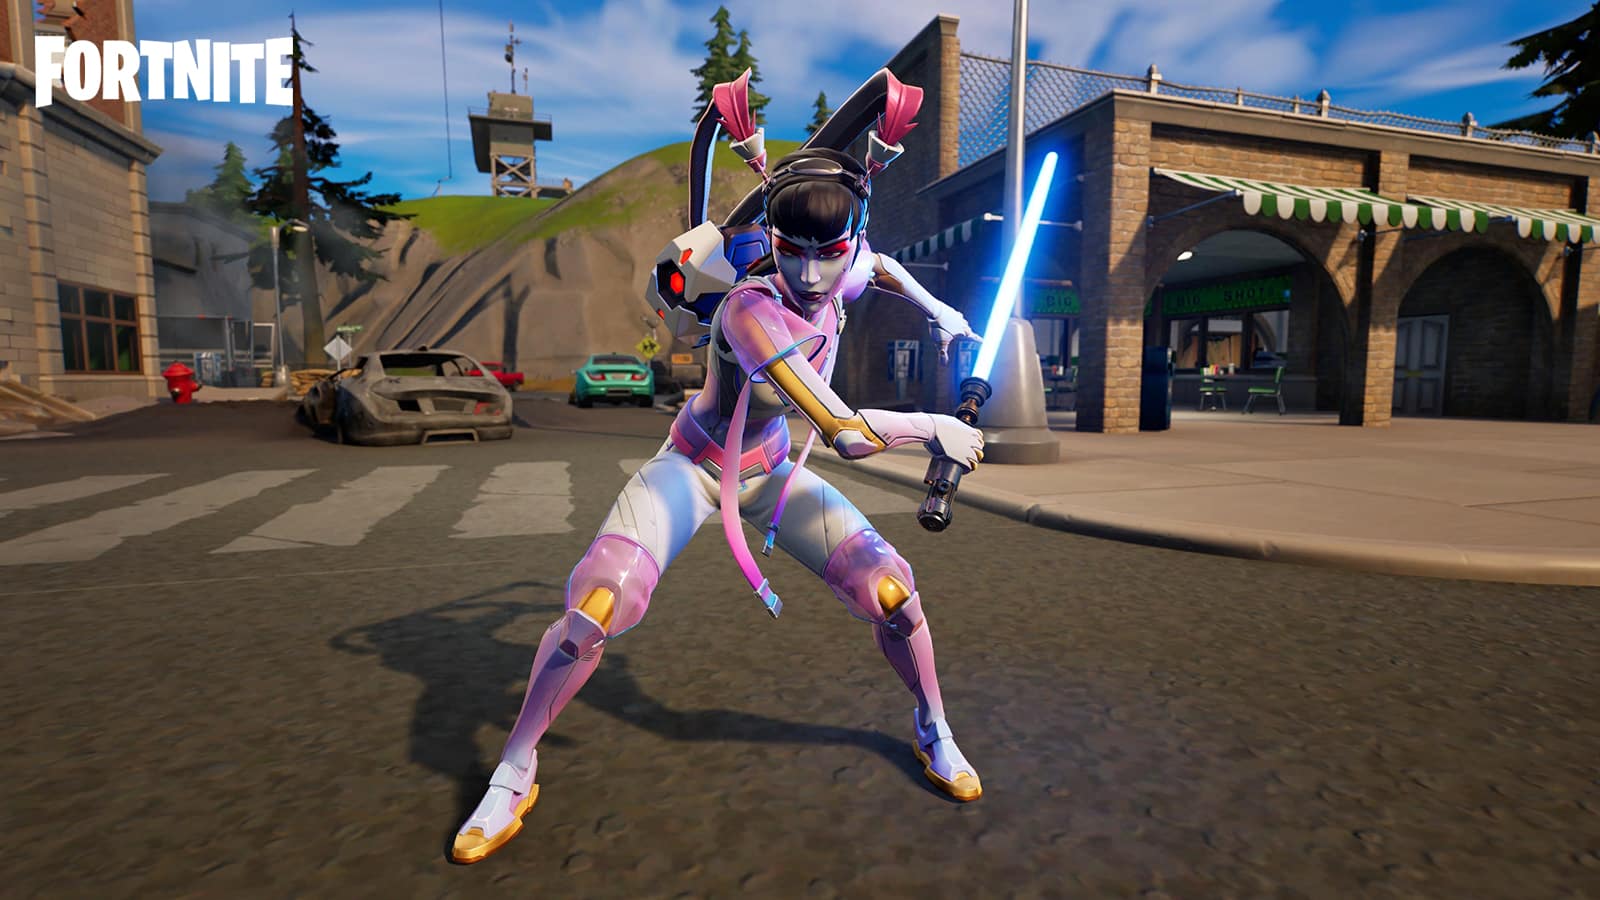 Star Wars Returns to Fortnite this May 2022!